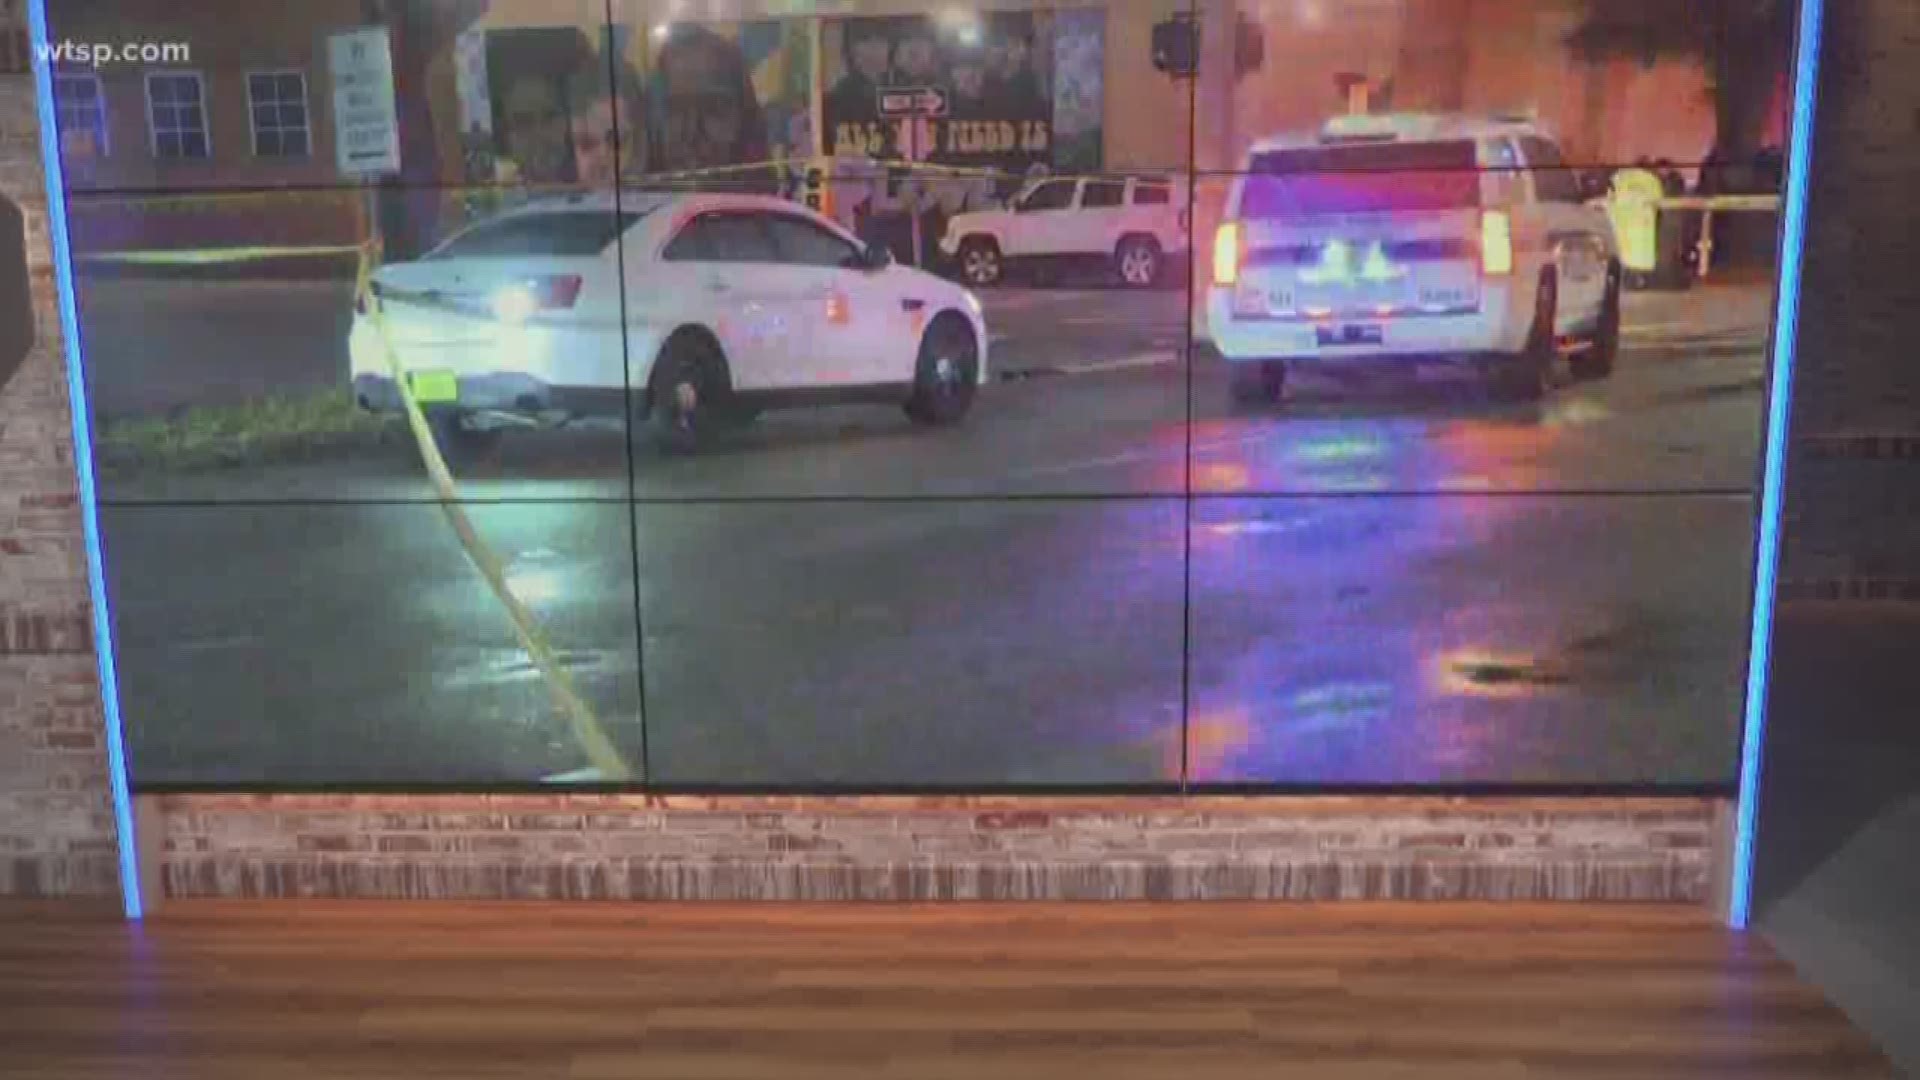 A 17-year old pedestrian was killed when two cars crashed and moved onto the curb near downtown St. Petersburg.